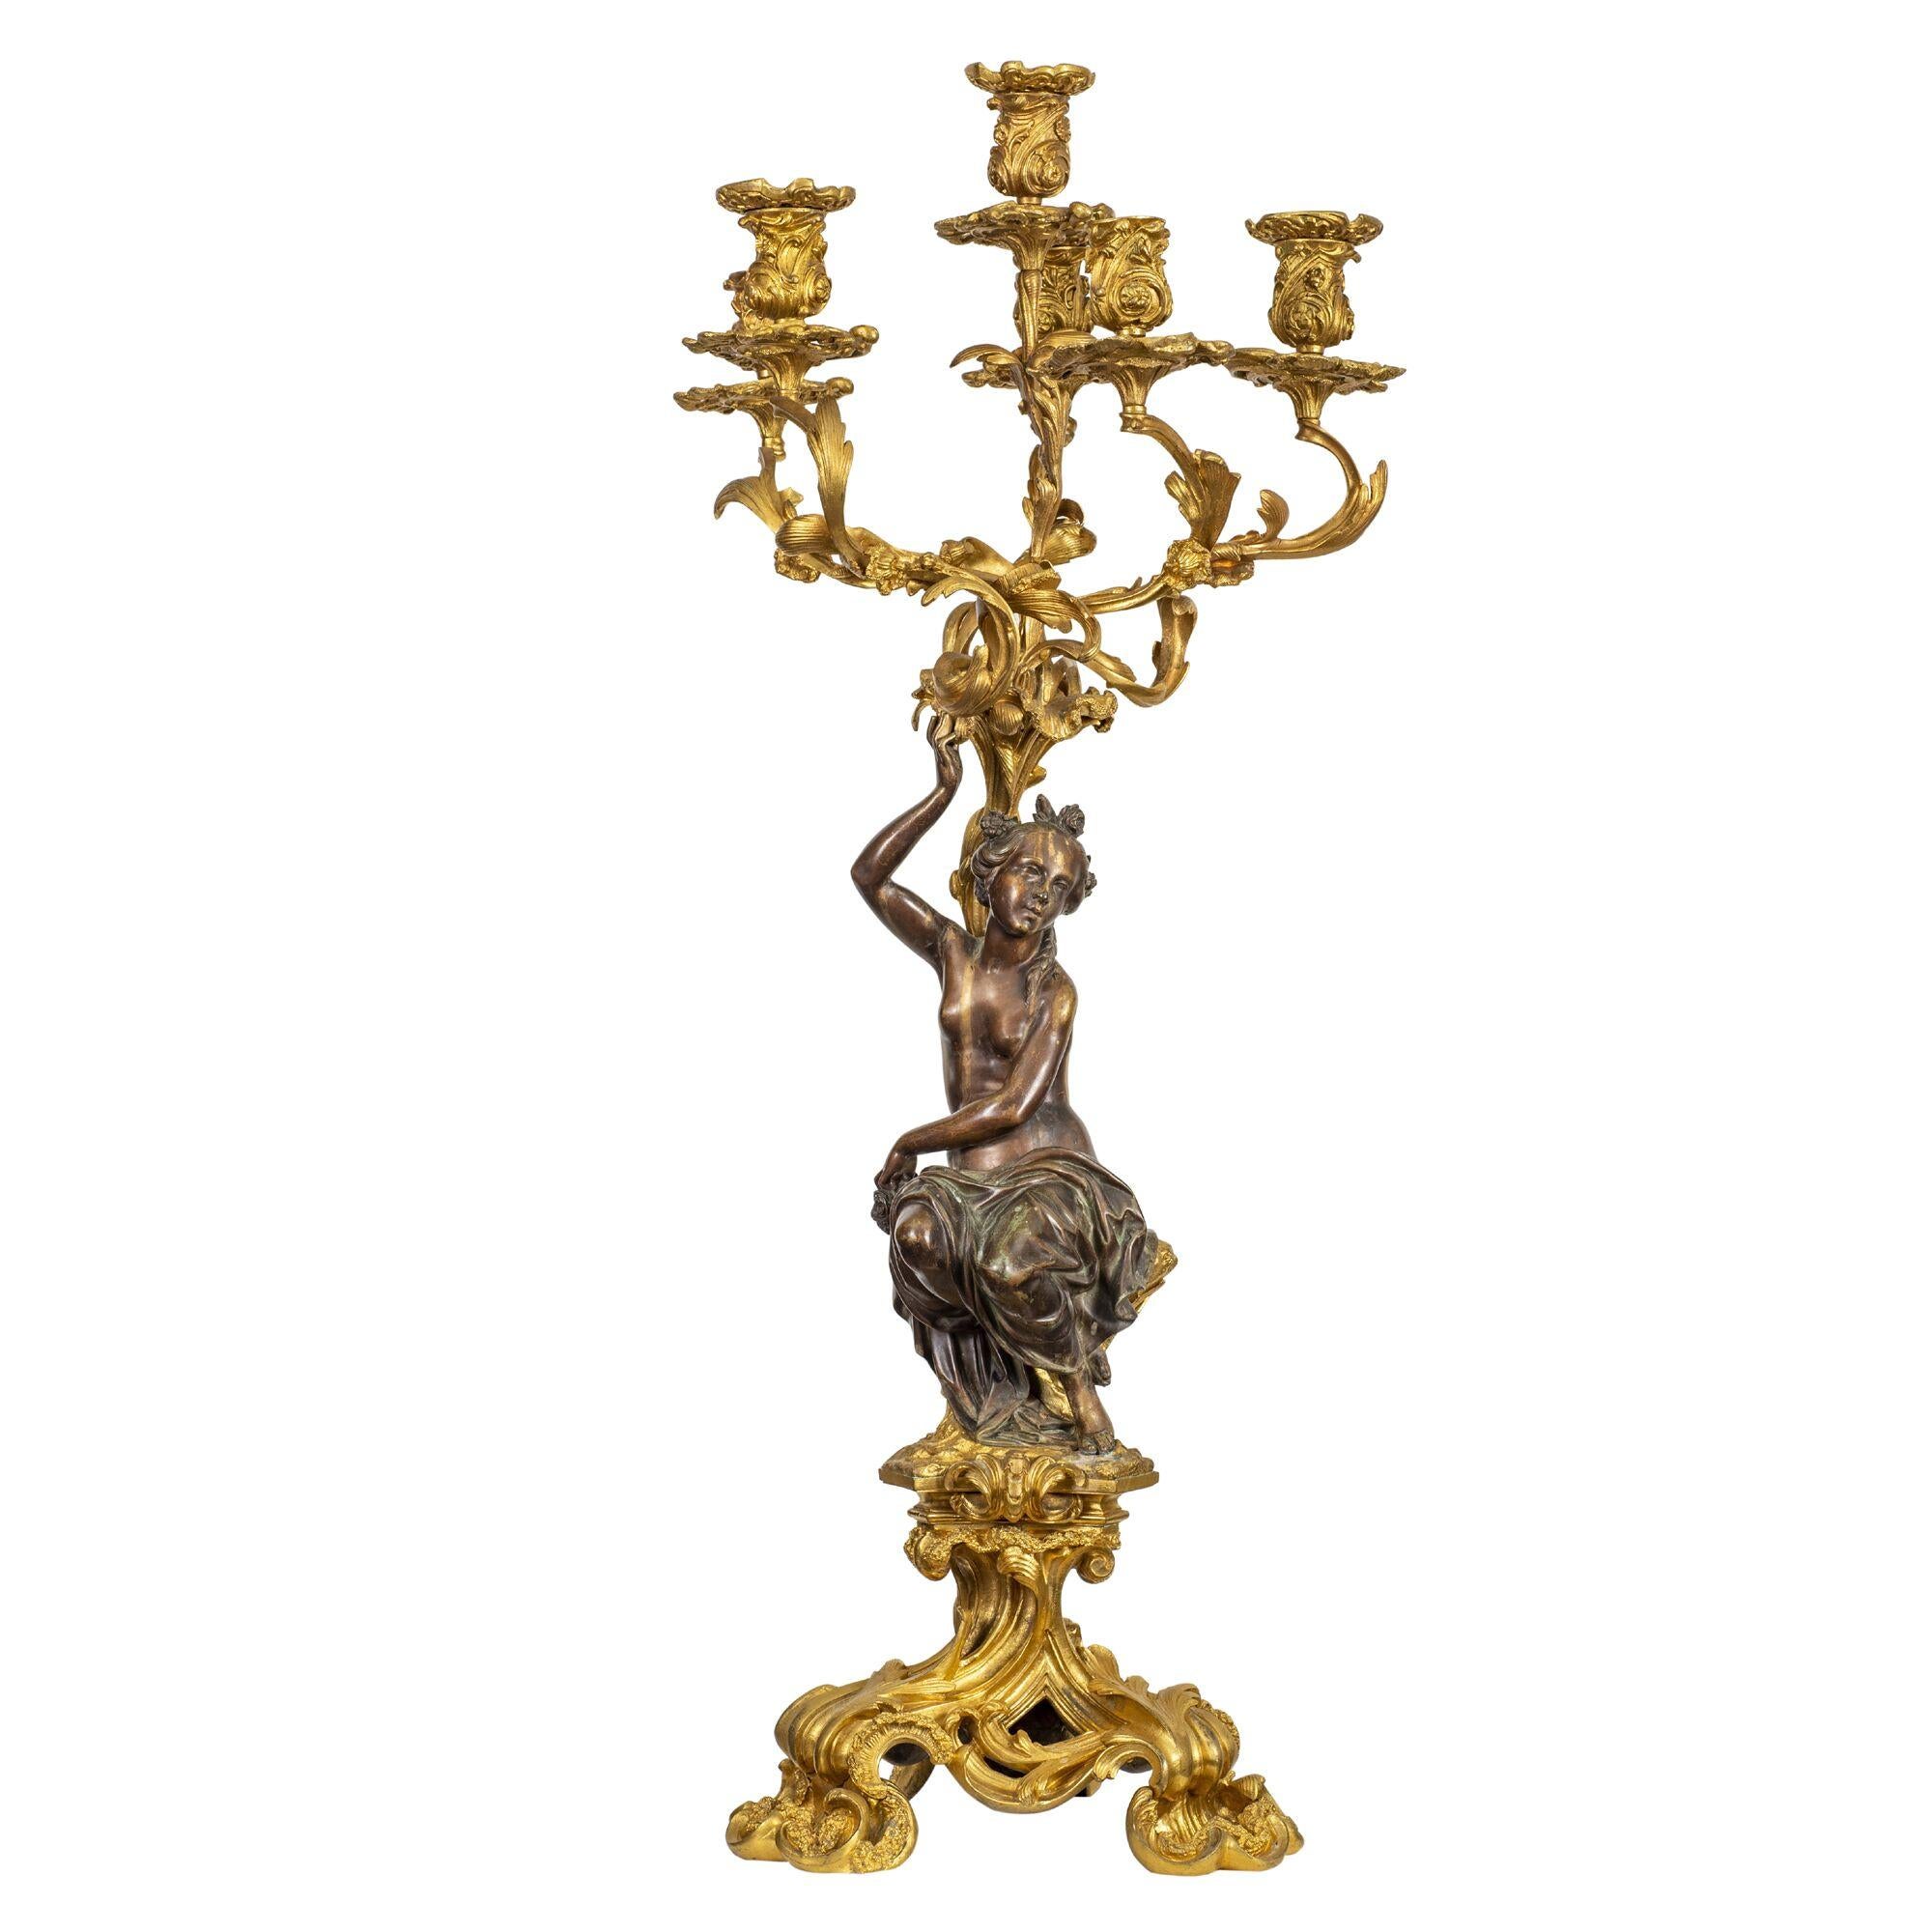 A large and fine pair of Louis XVI patinated and gilt bronze figural six-light candelabra, in the manner of Falcone,
France, circa 1880,
Measures: Height 31 in. (787.4 mm.)
Width 12 in. (304.8 mm.)
Depth 12 in. (304.8 mm.).